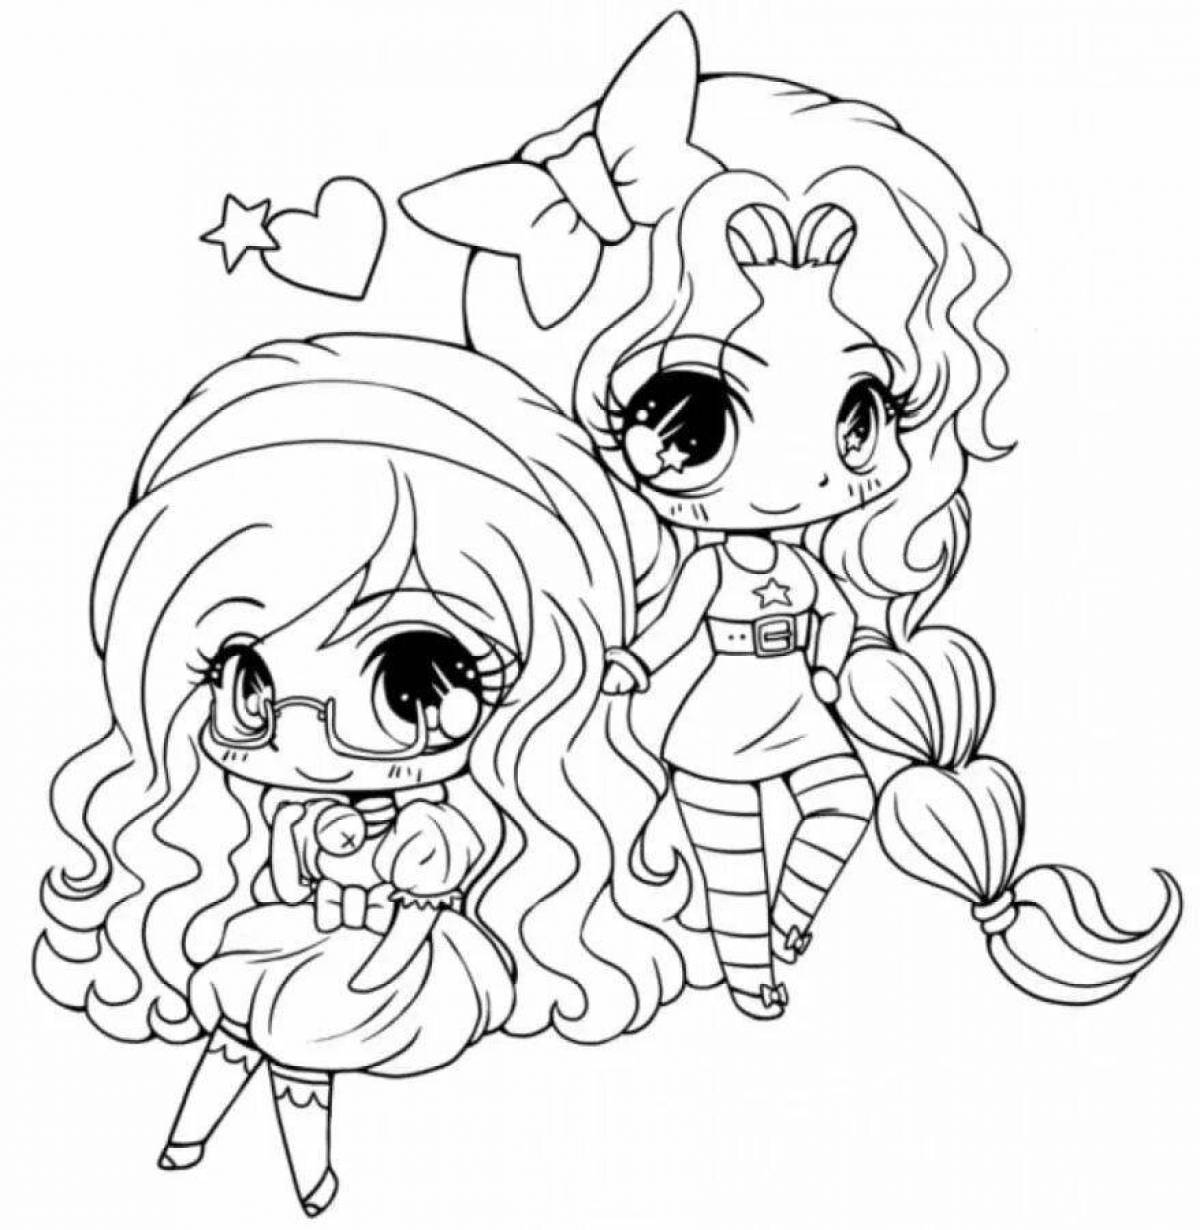 Coloring doll magical cave club